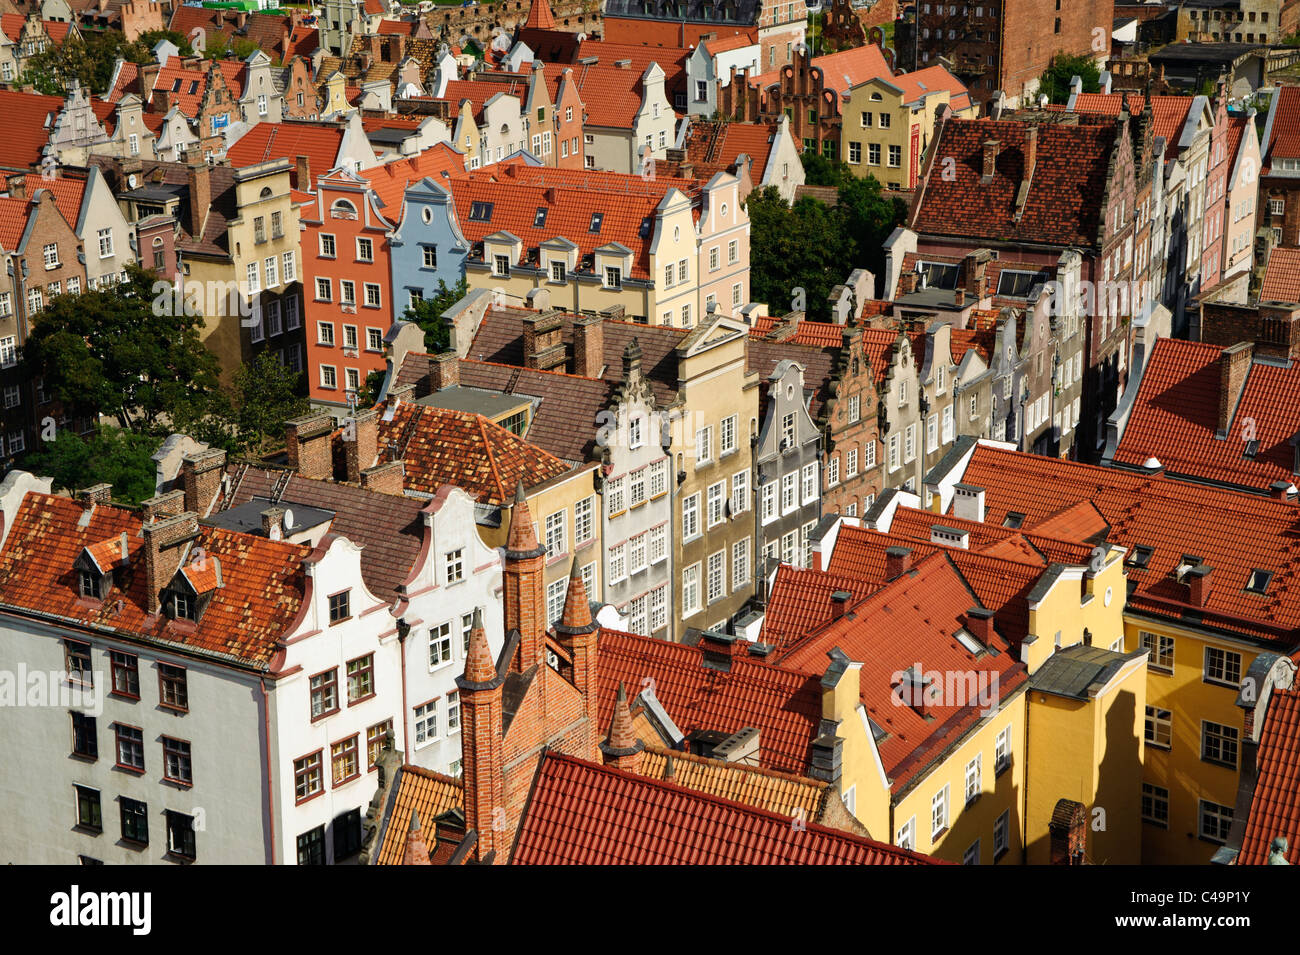 Rooftops of Główne Miasto old town, Gdansk, Poland, from the tower of the historic Town Hall Stock Photo